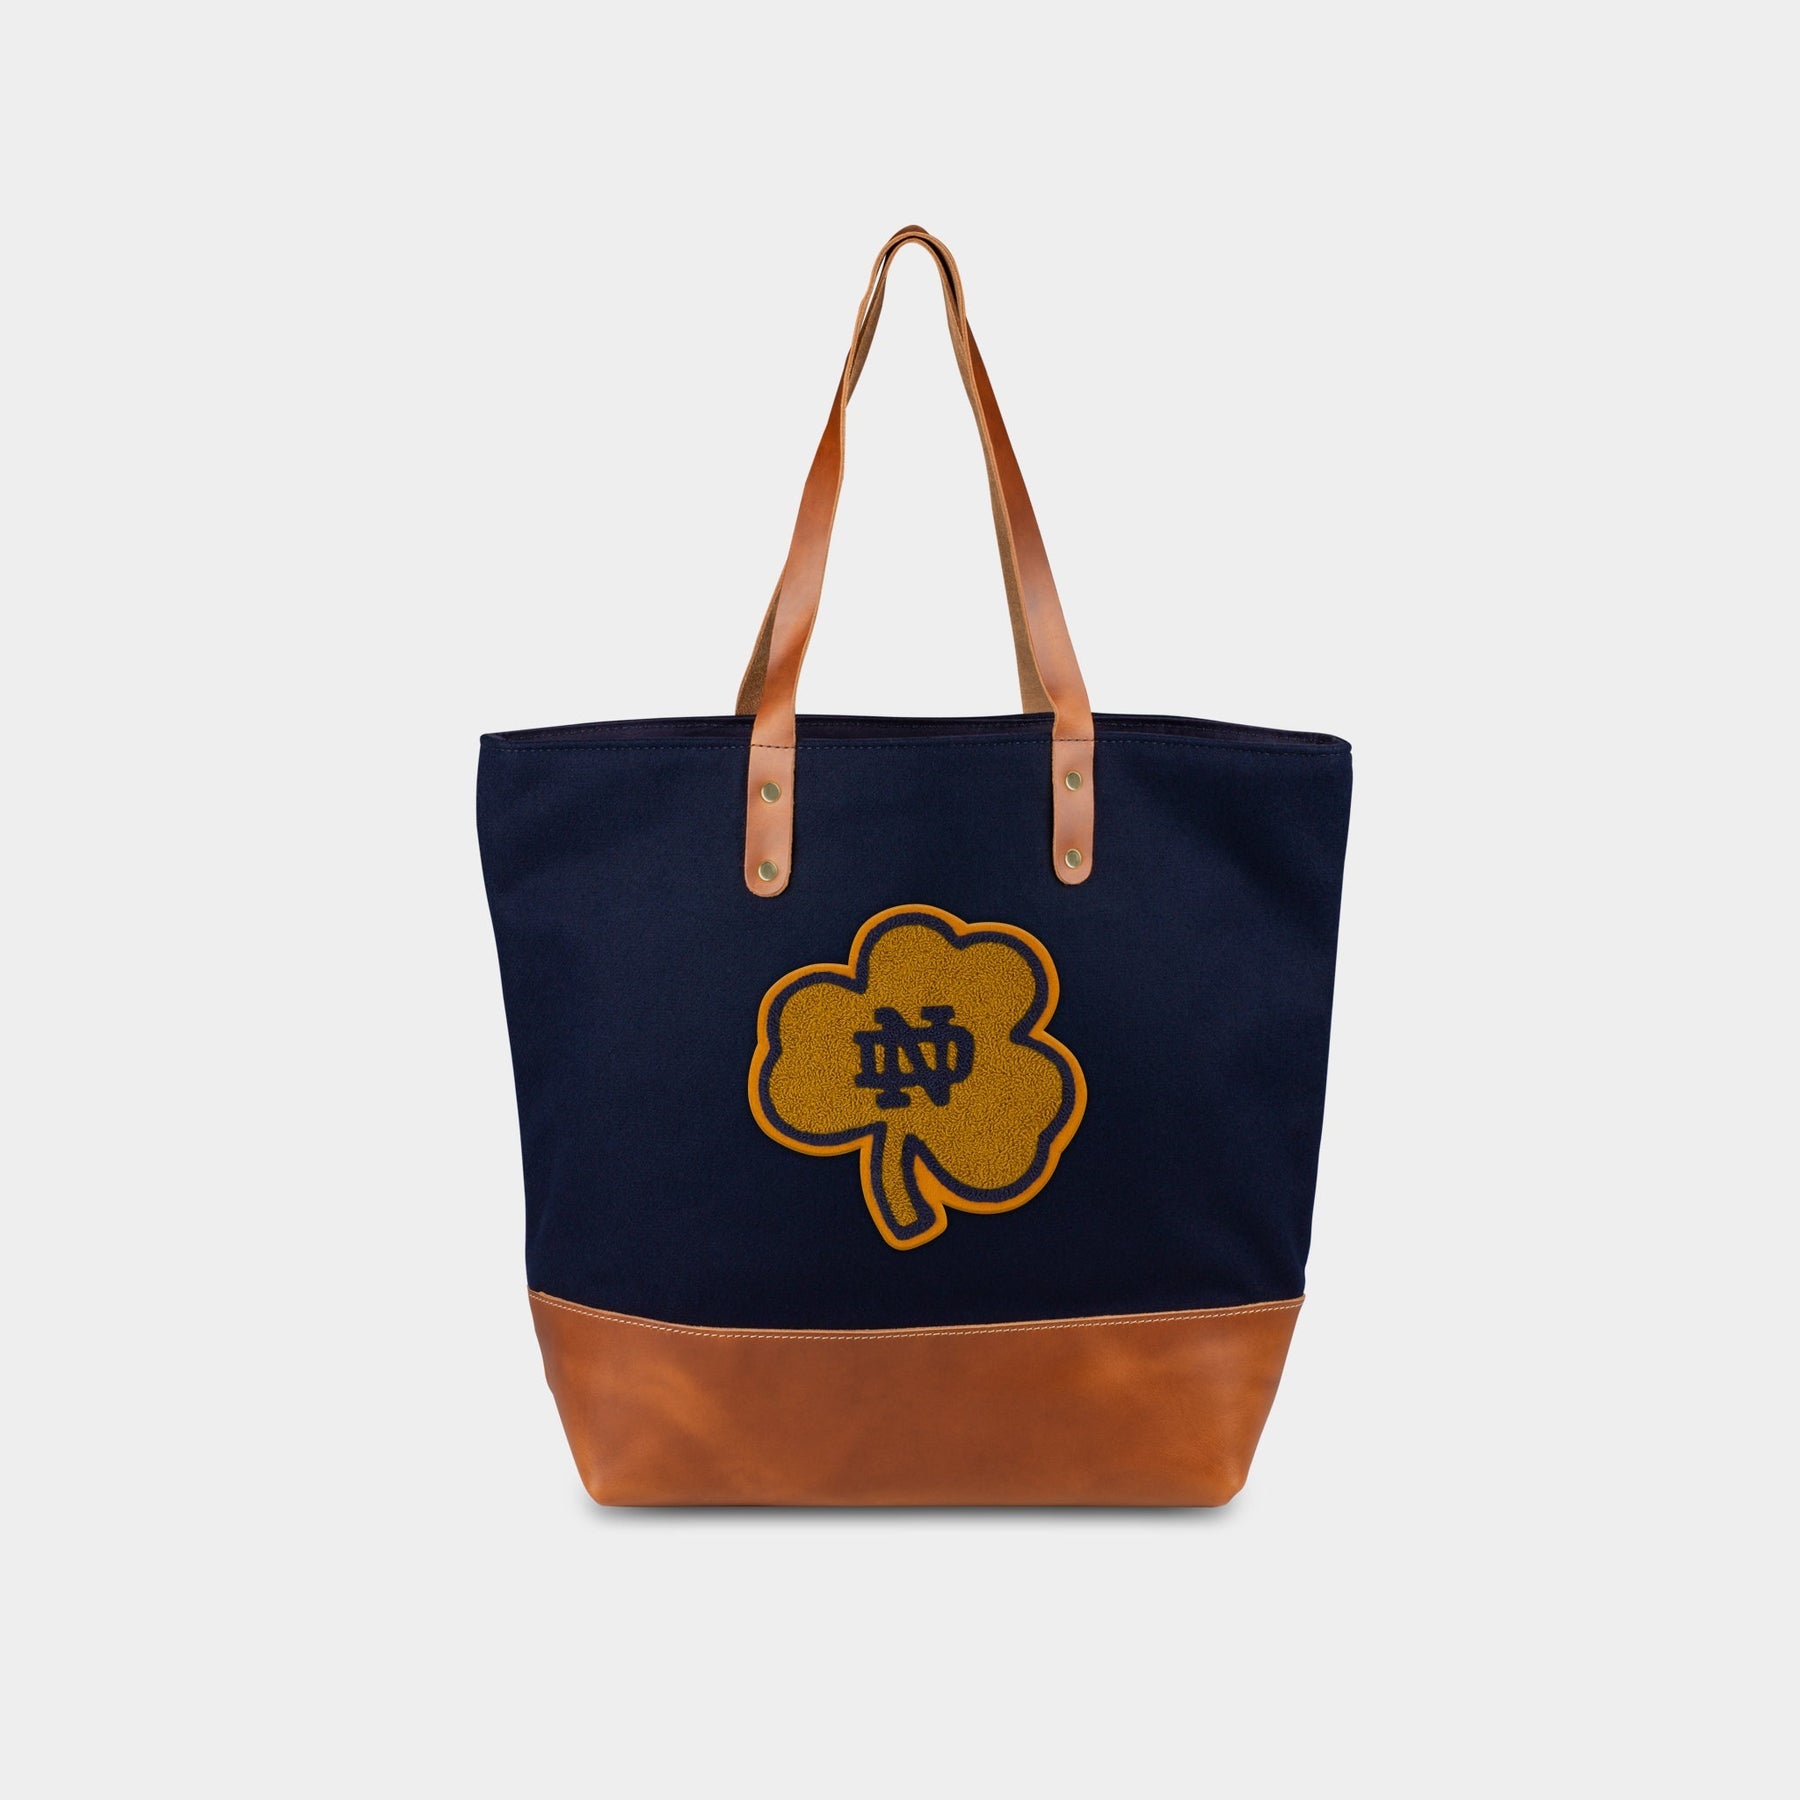 Notre Dame "Clover" Tote in Navy